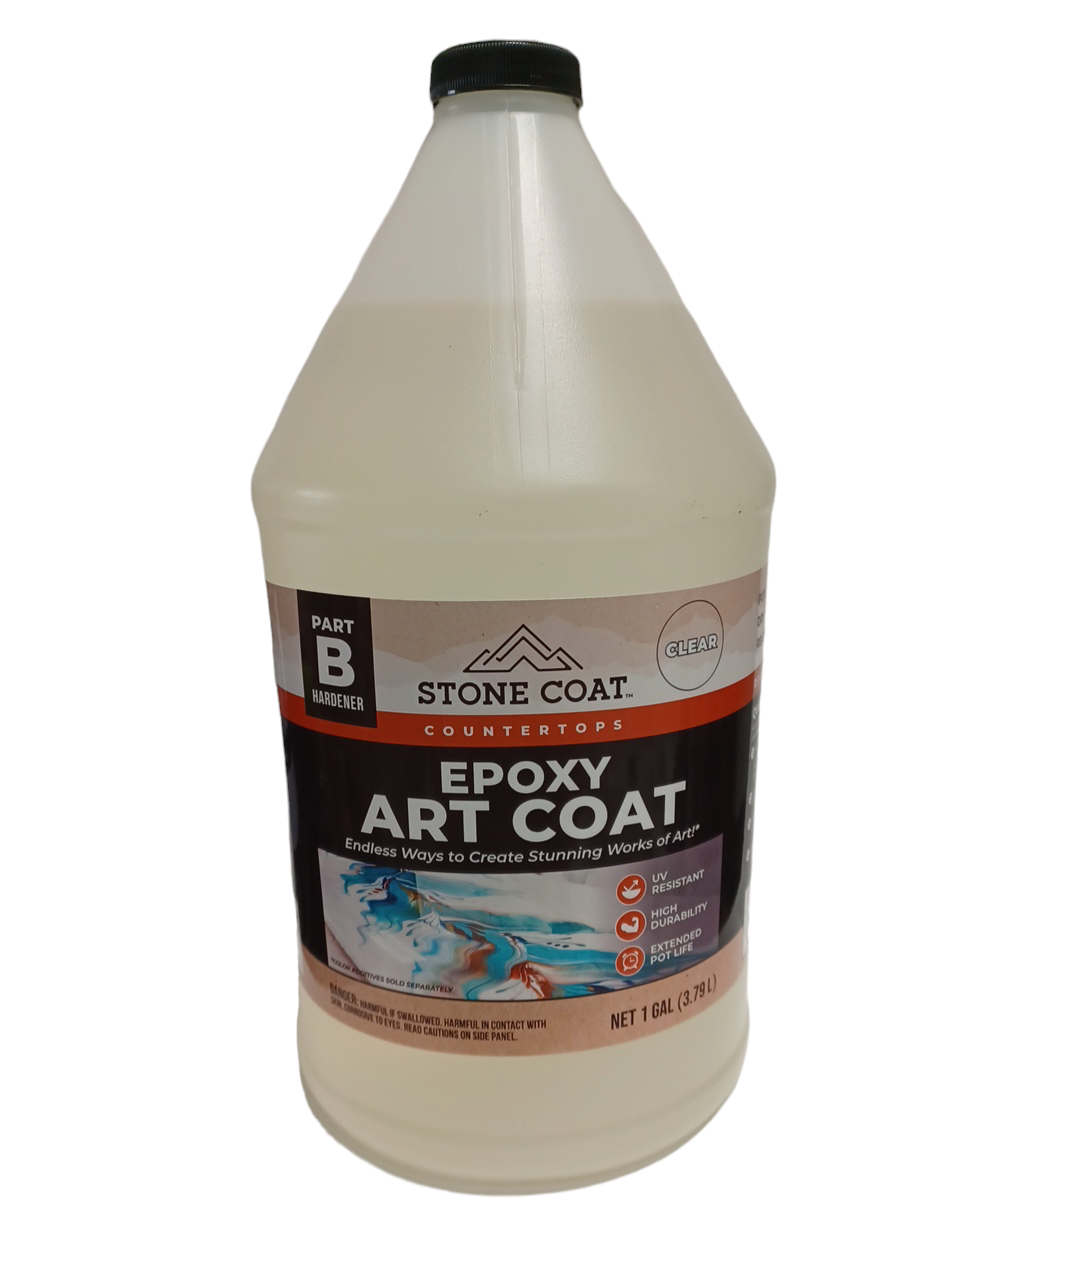 Art Coat Epoxy (Same as Original with higher UVA protection)